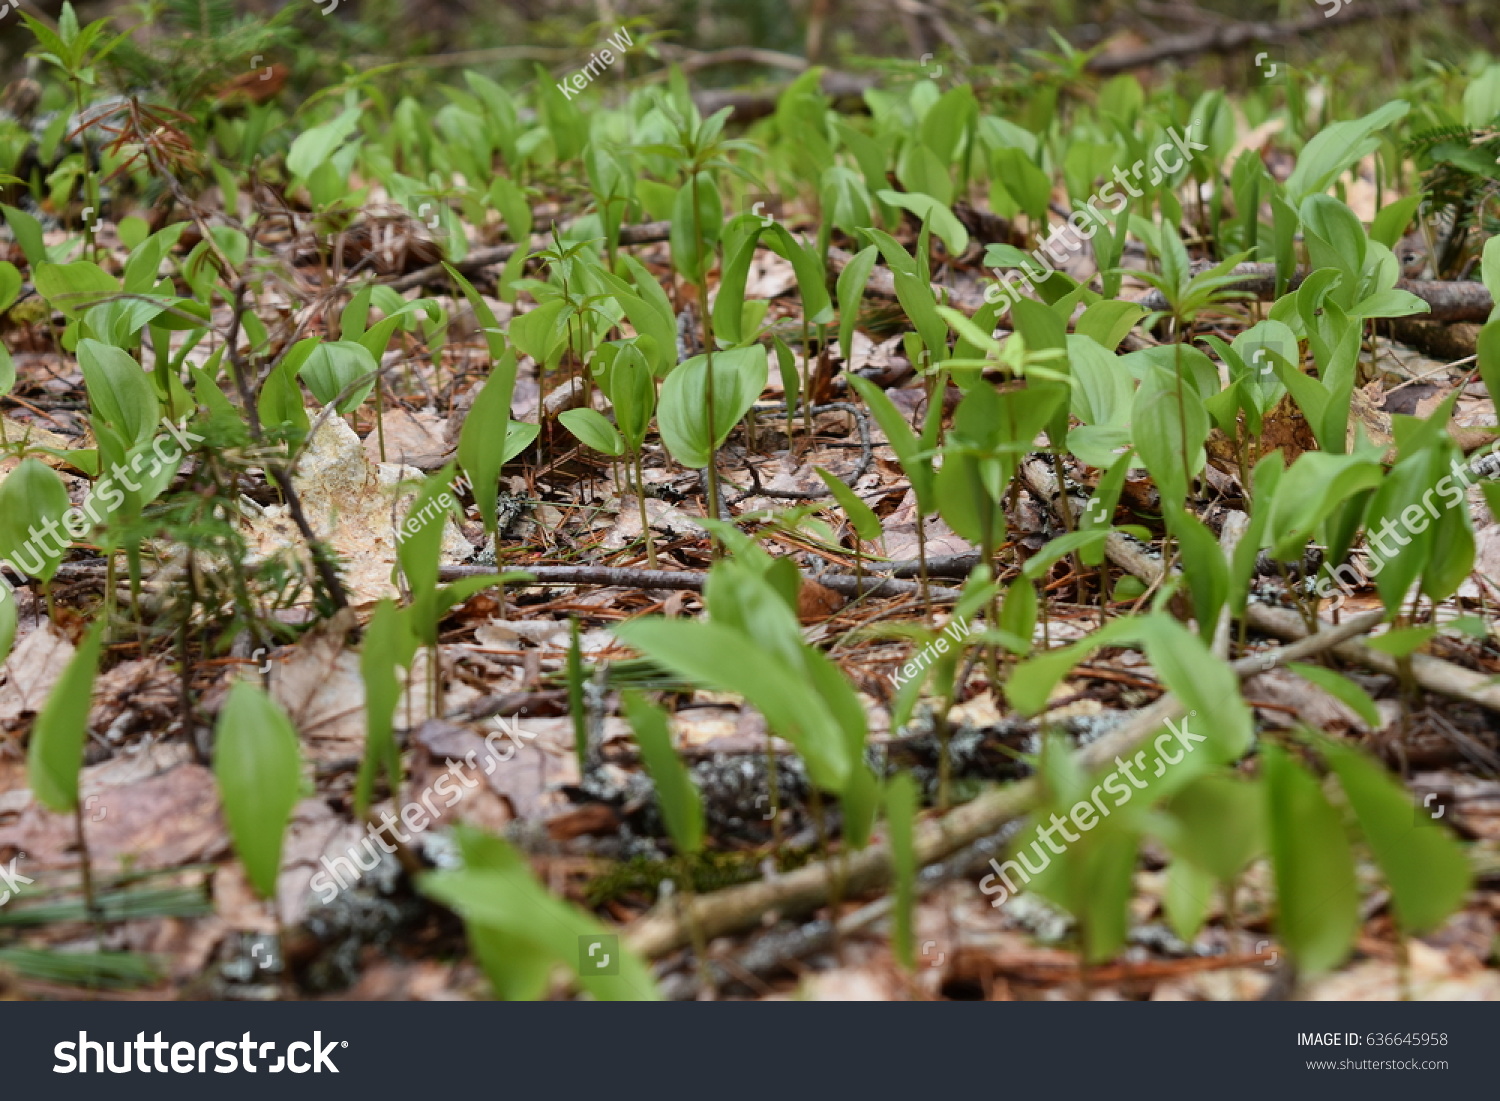 Small Plants Growing On Forest Floor Stock Photo Edit Now 636645958